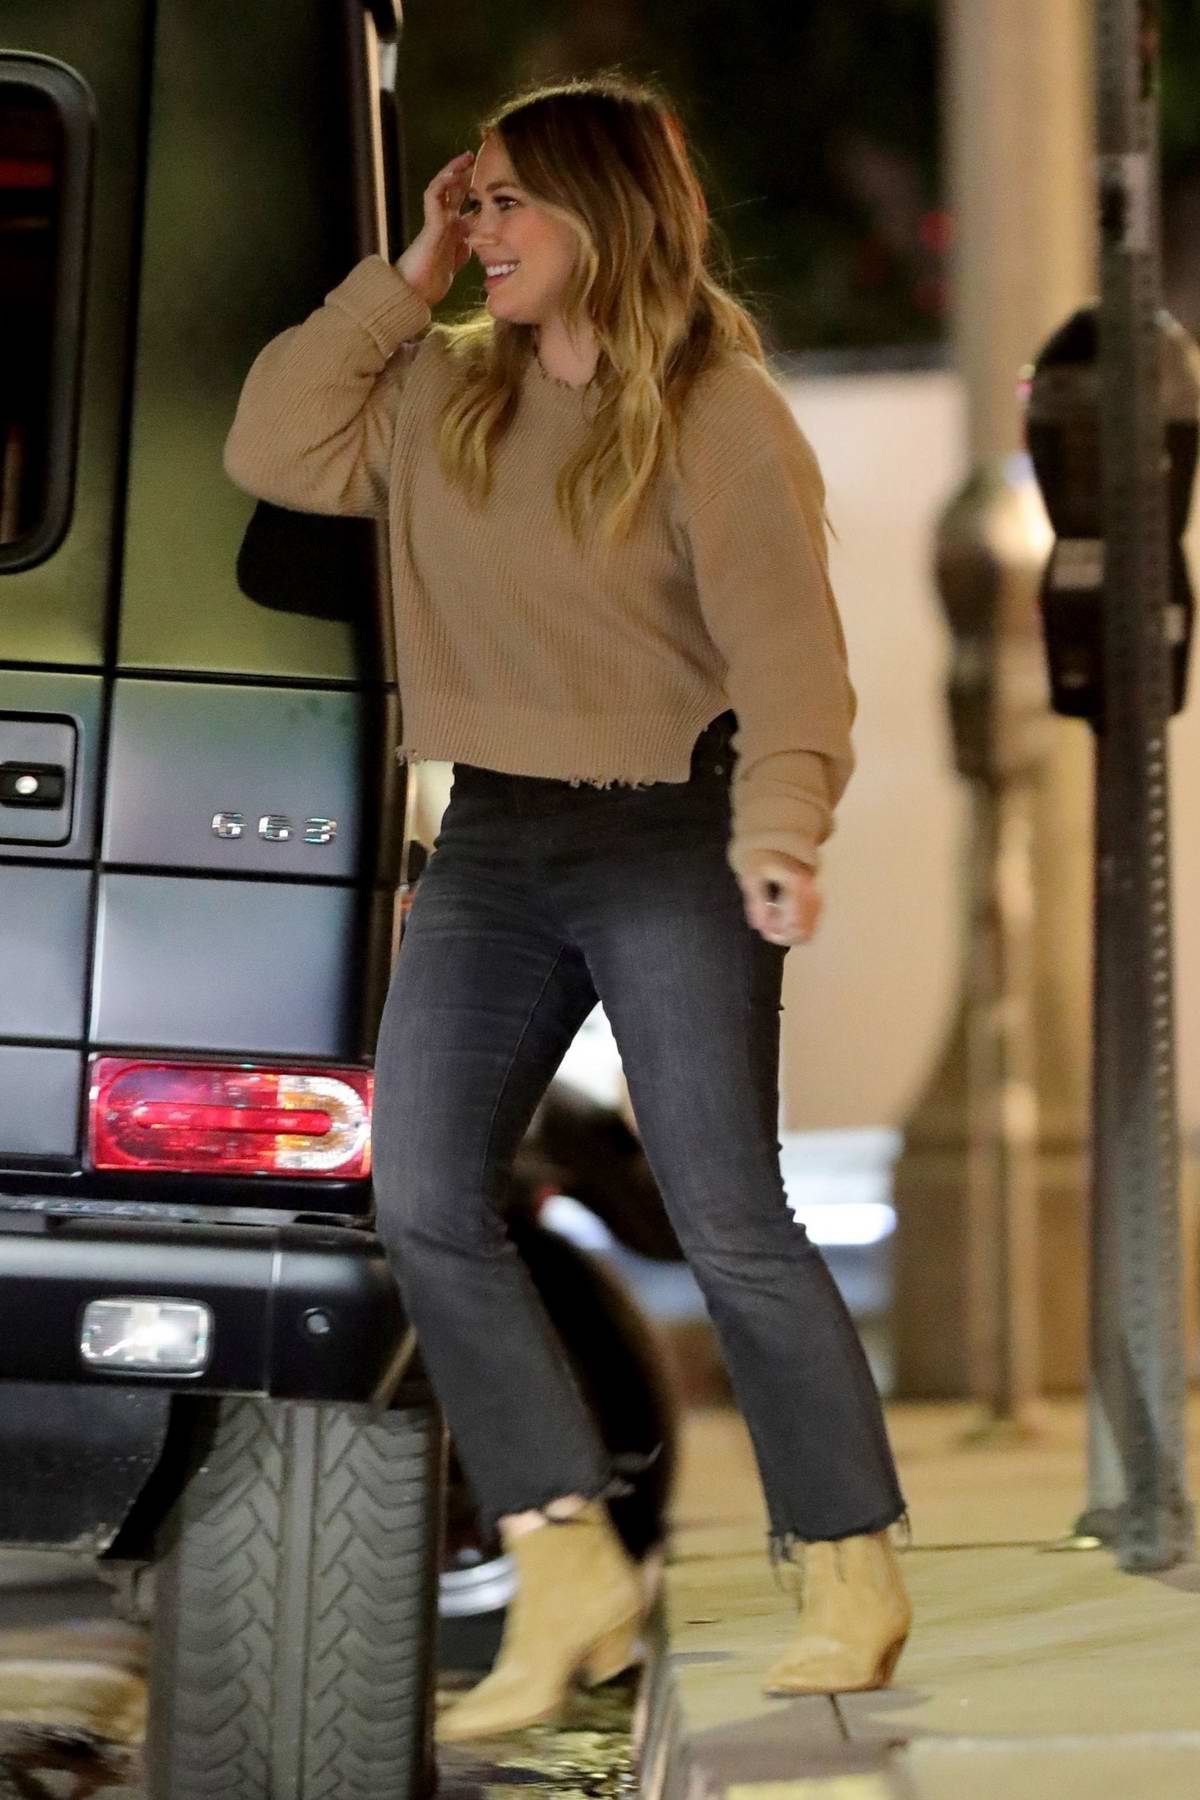 Charli D'Amelio wears a grey tee and black leggings while spotted